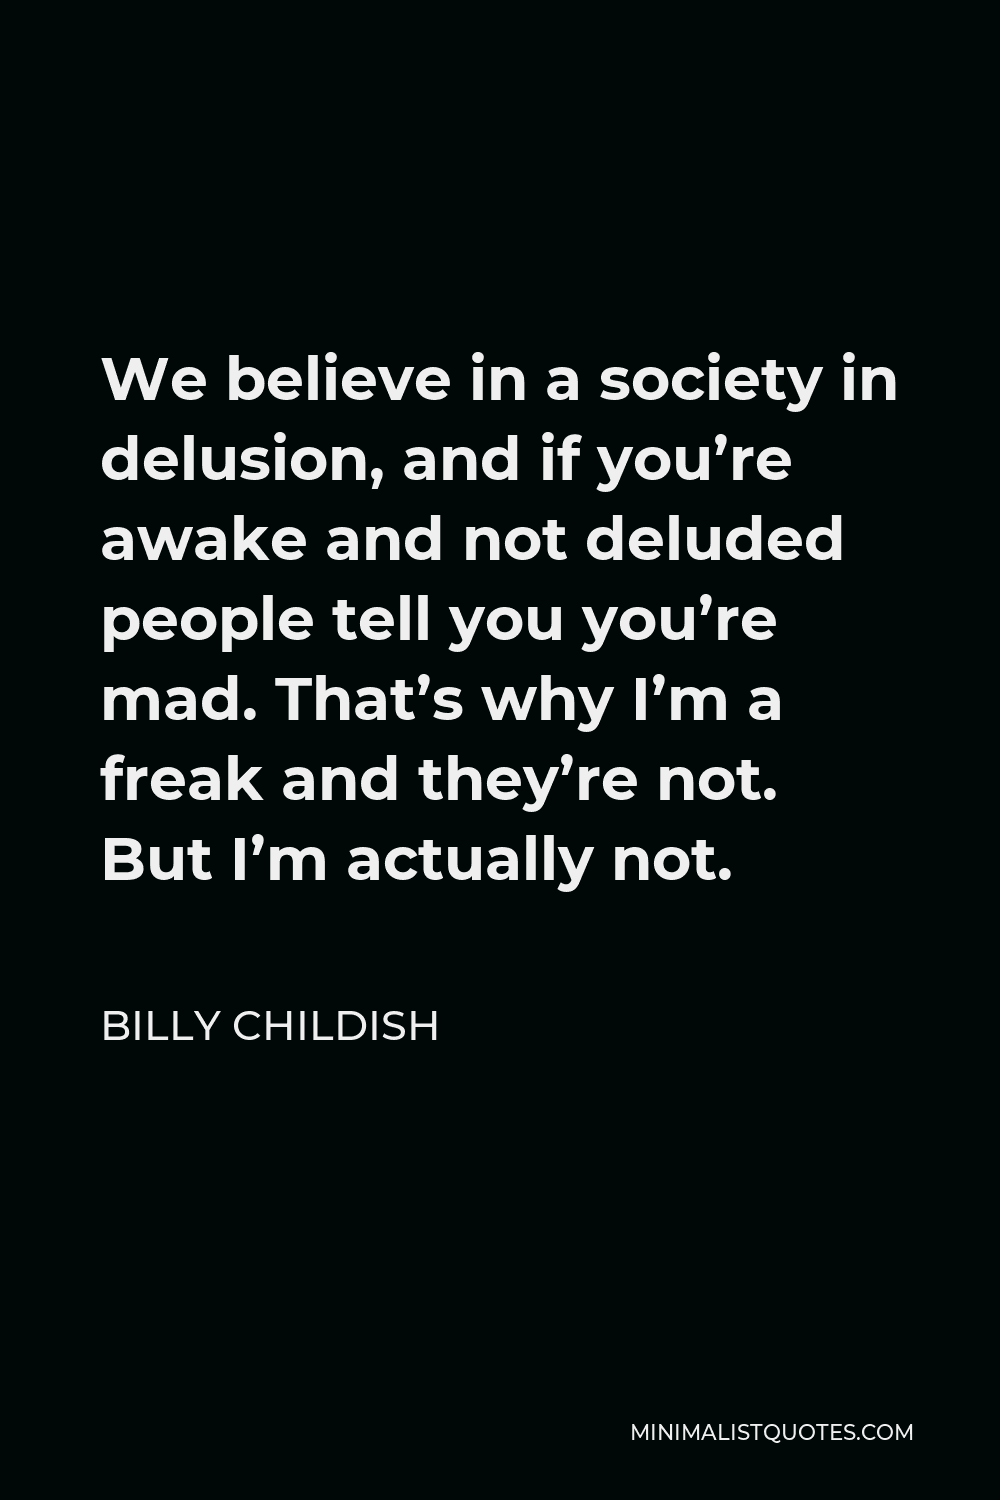 Billy Childish Quote - We believe in a society in delusion, and if you’re awake and not deluded people tell you you’re mad. That’s why I’m a freak and they’re not. But I’m actually not.